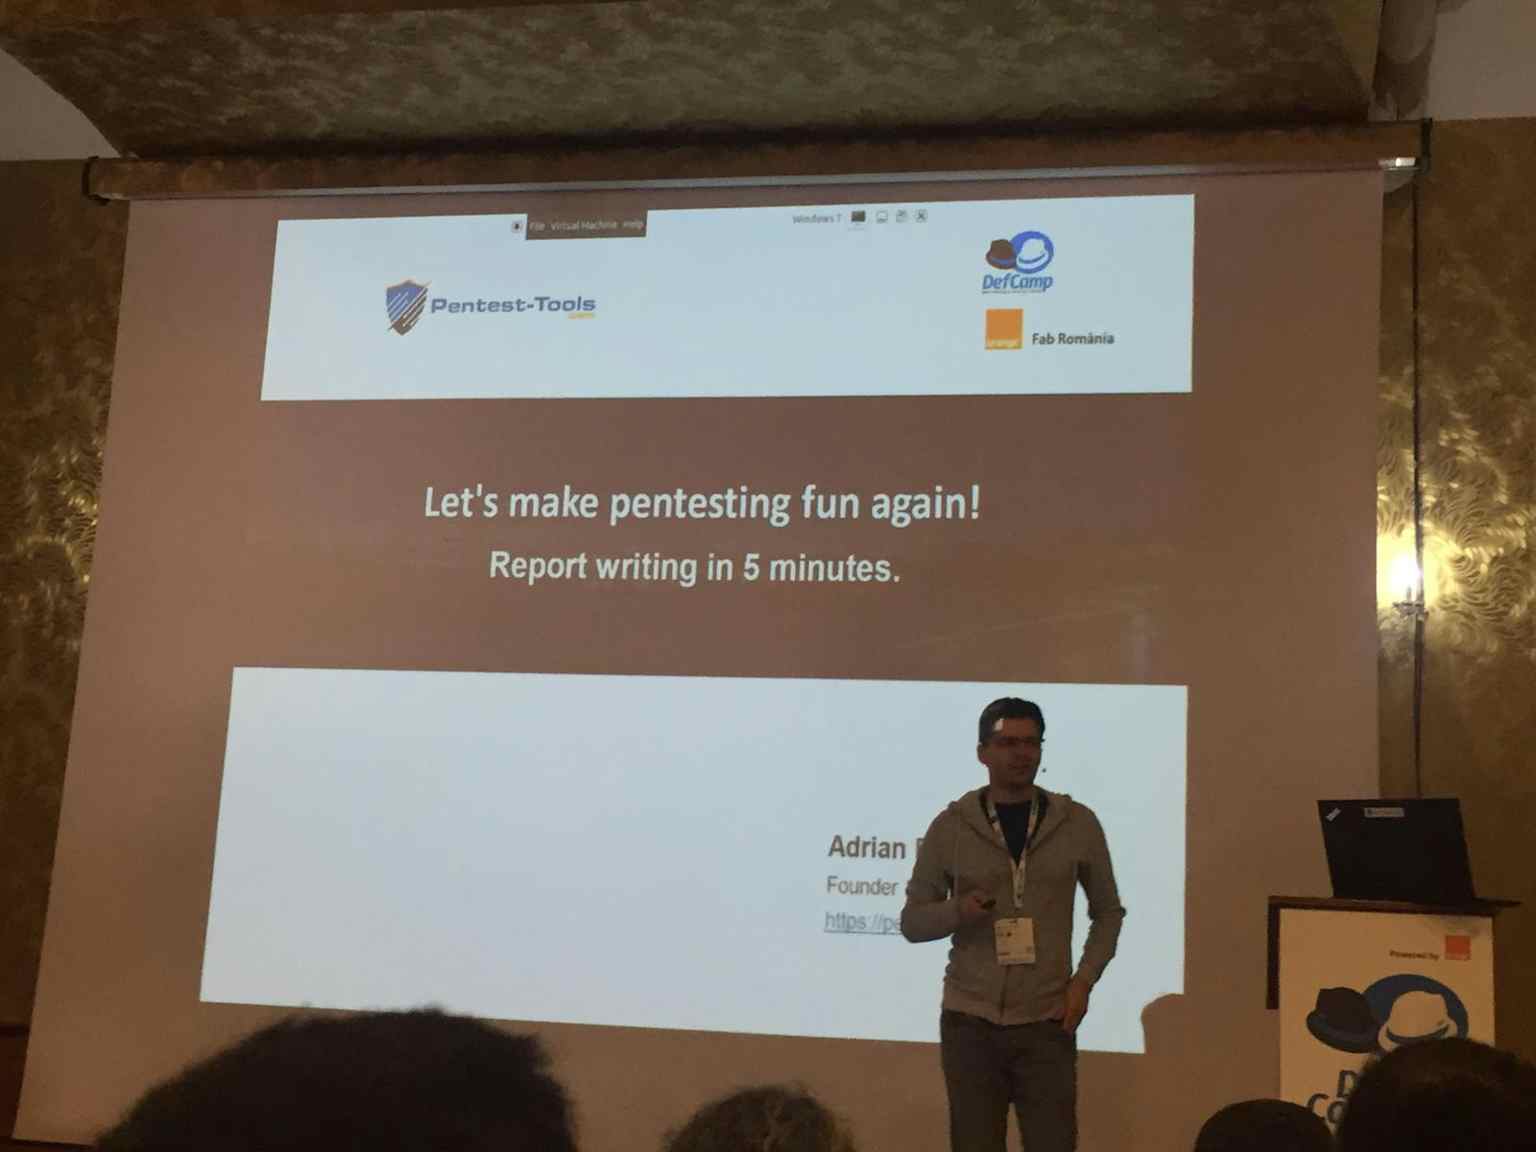 Adrian speaking at DefCamp conference about writing a pentest report faster